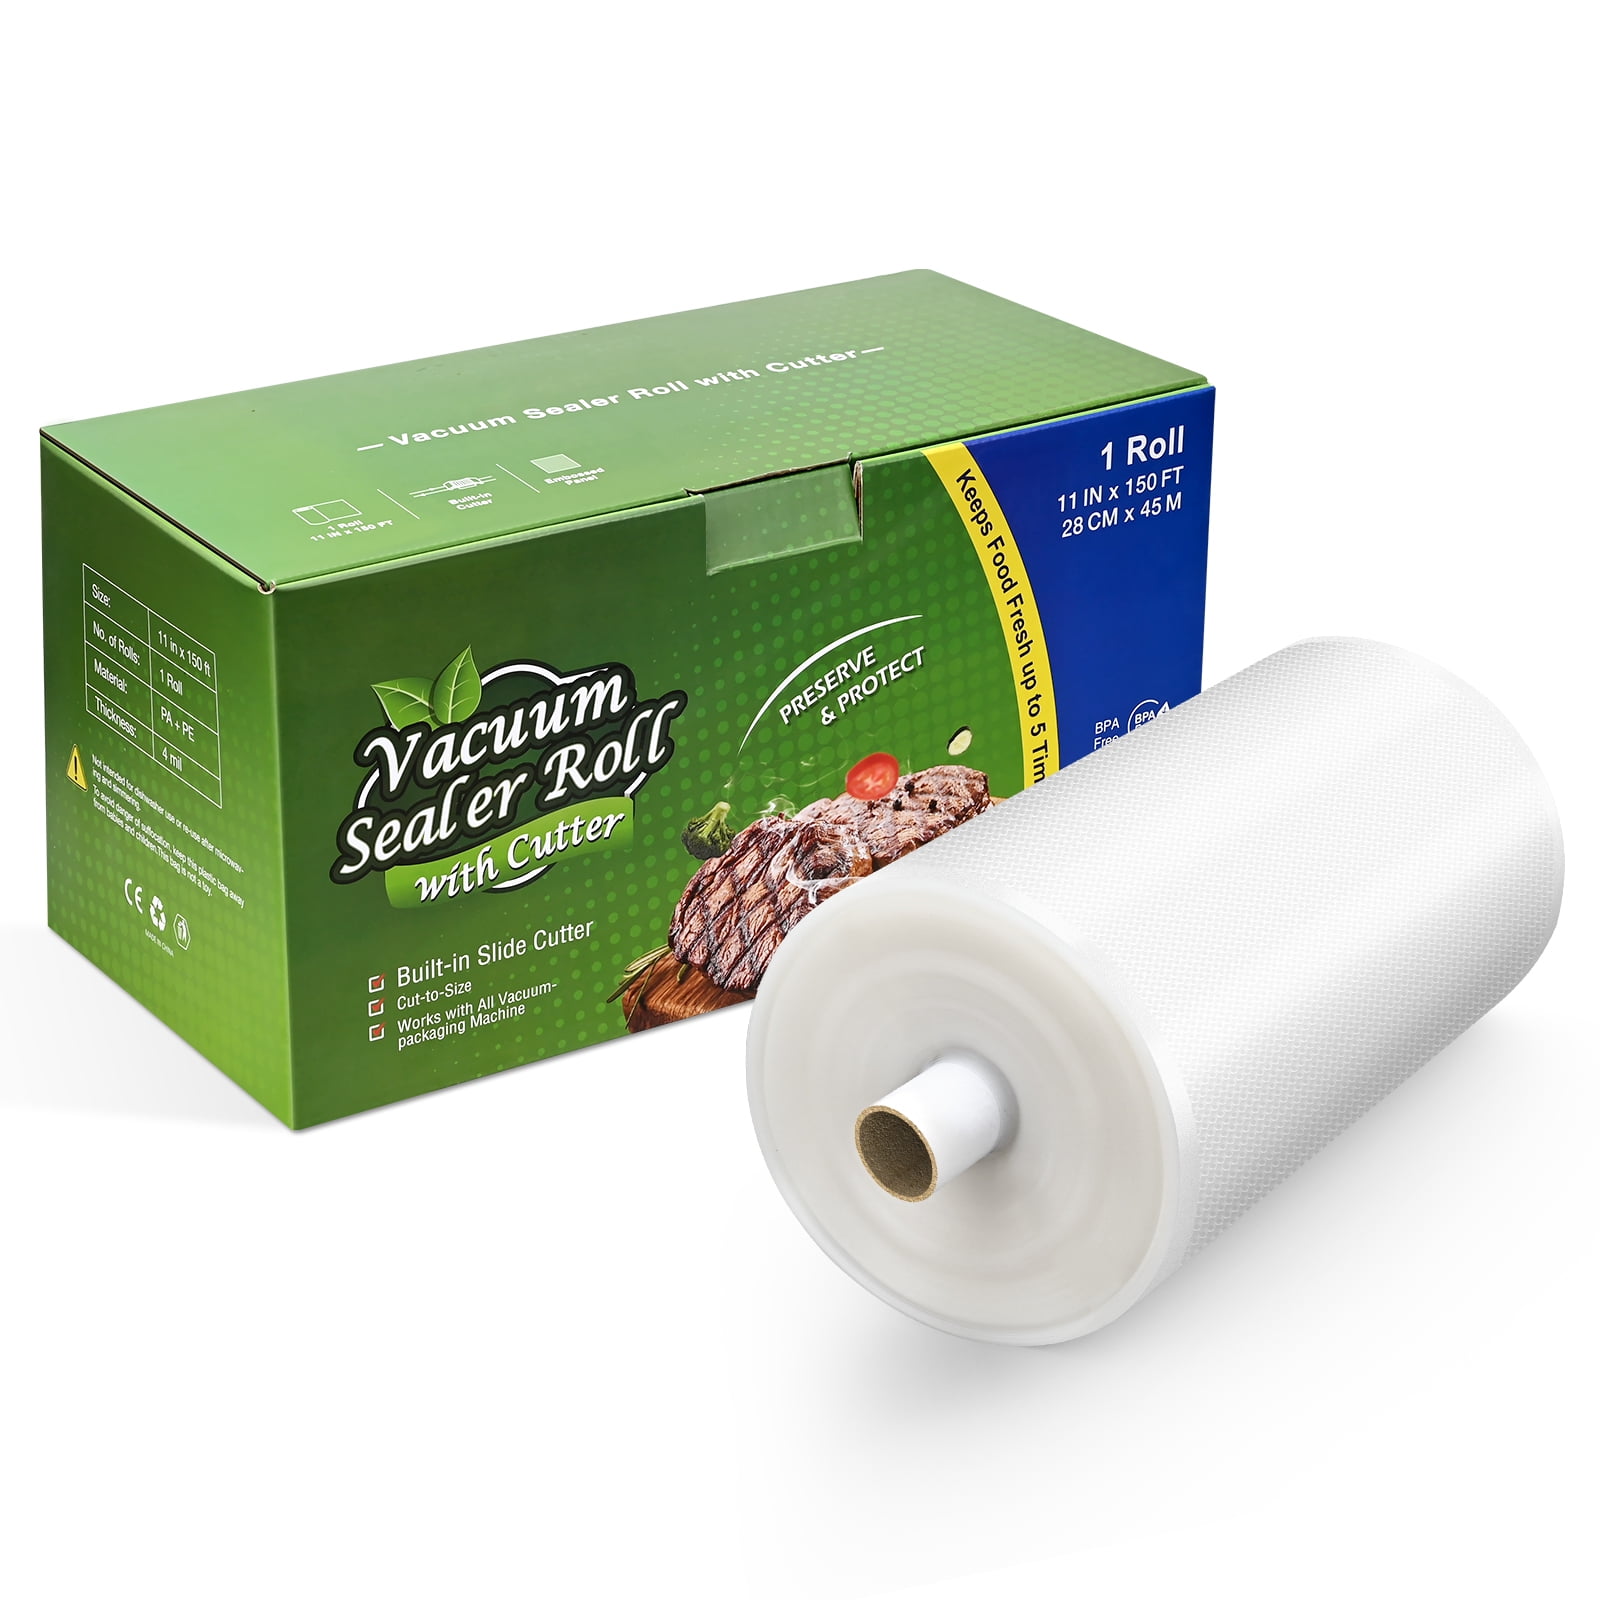 Vacuum Seal Rolls with Cutter Box Large - 11x150